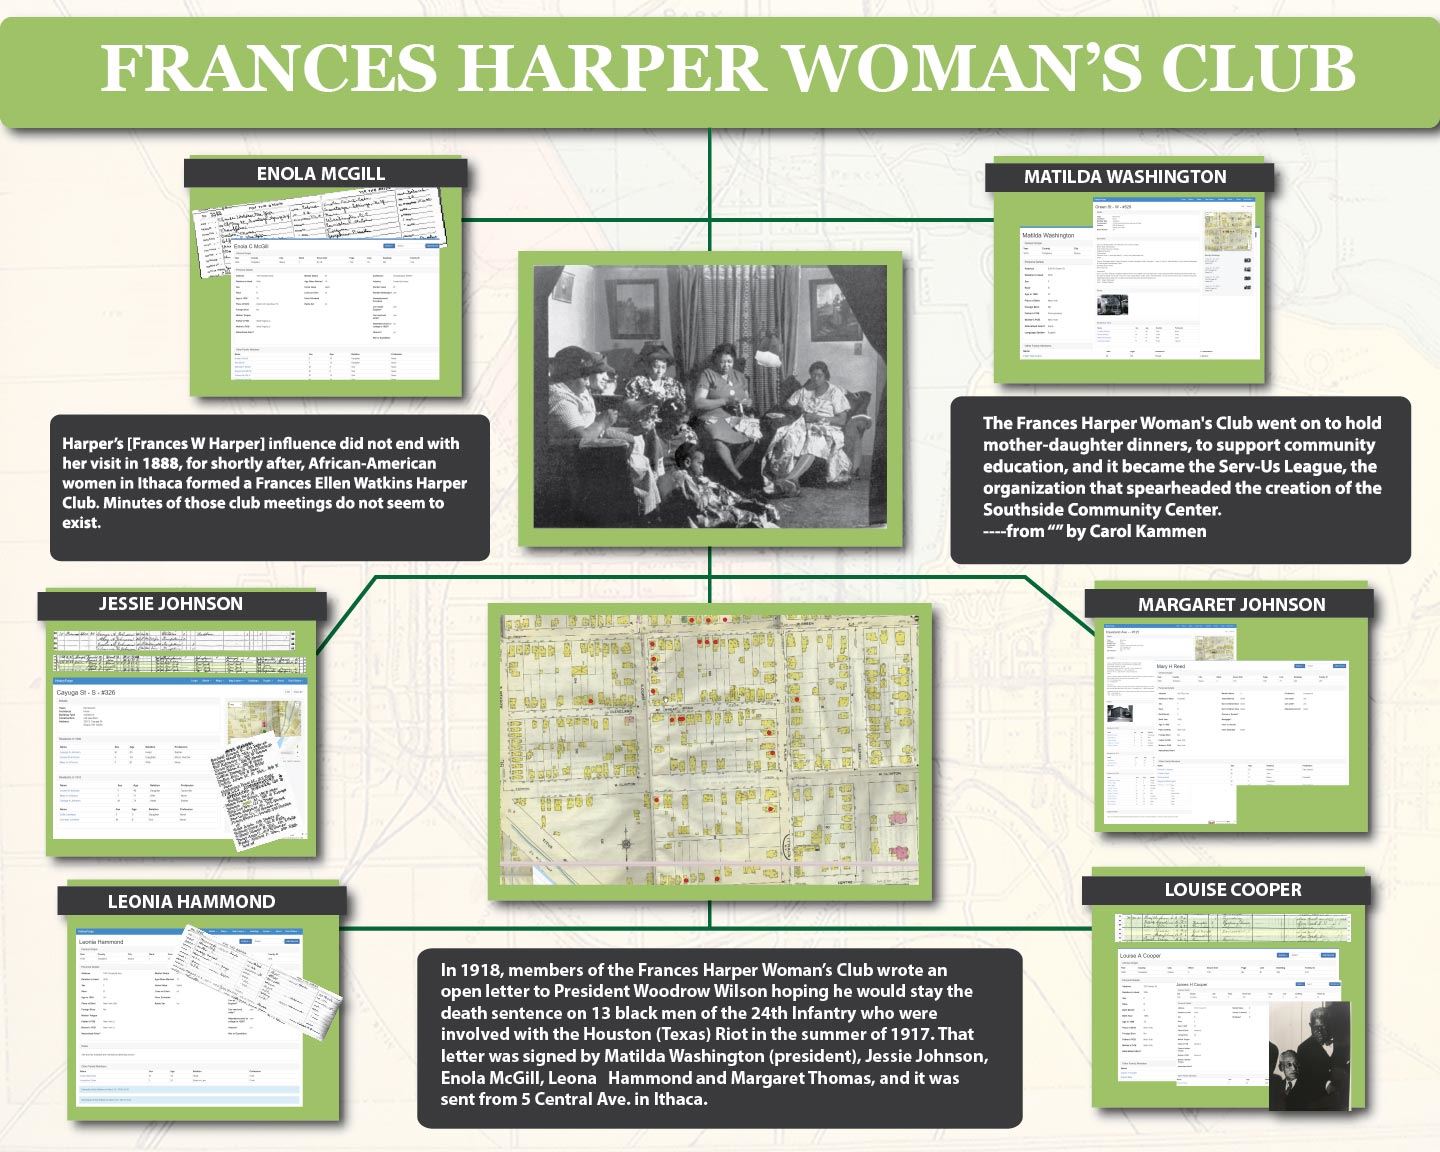 Frances Harper Woman's Club flyer with information about the history of the club and significant figures.